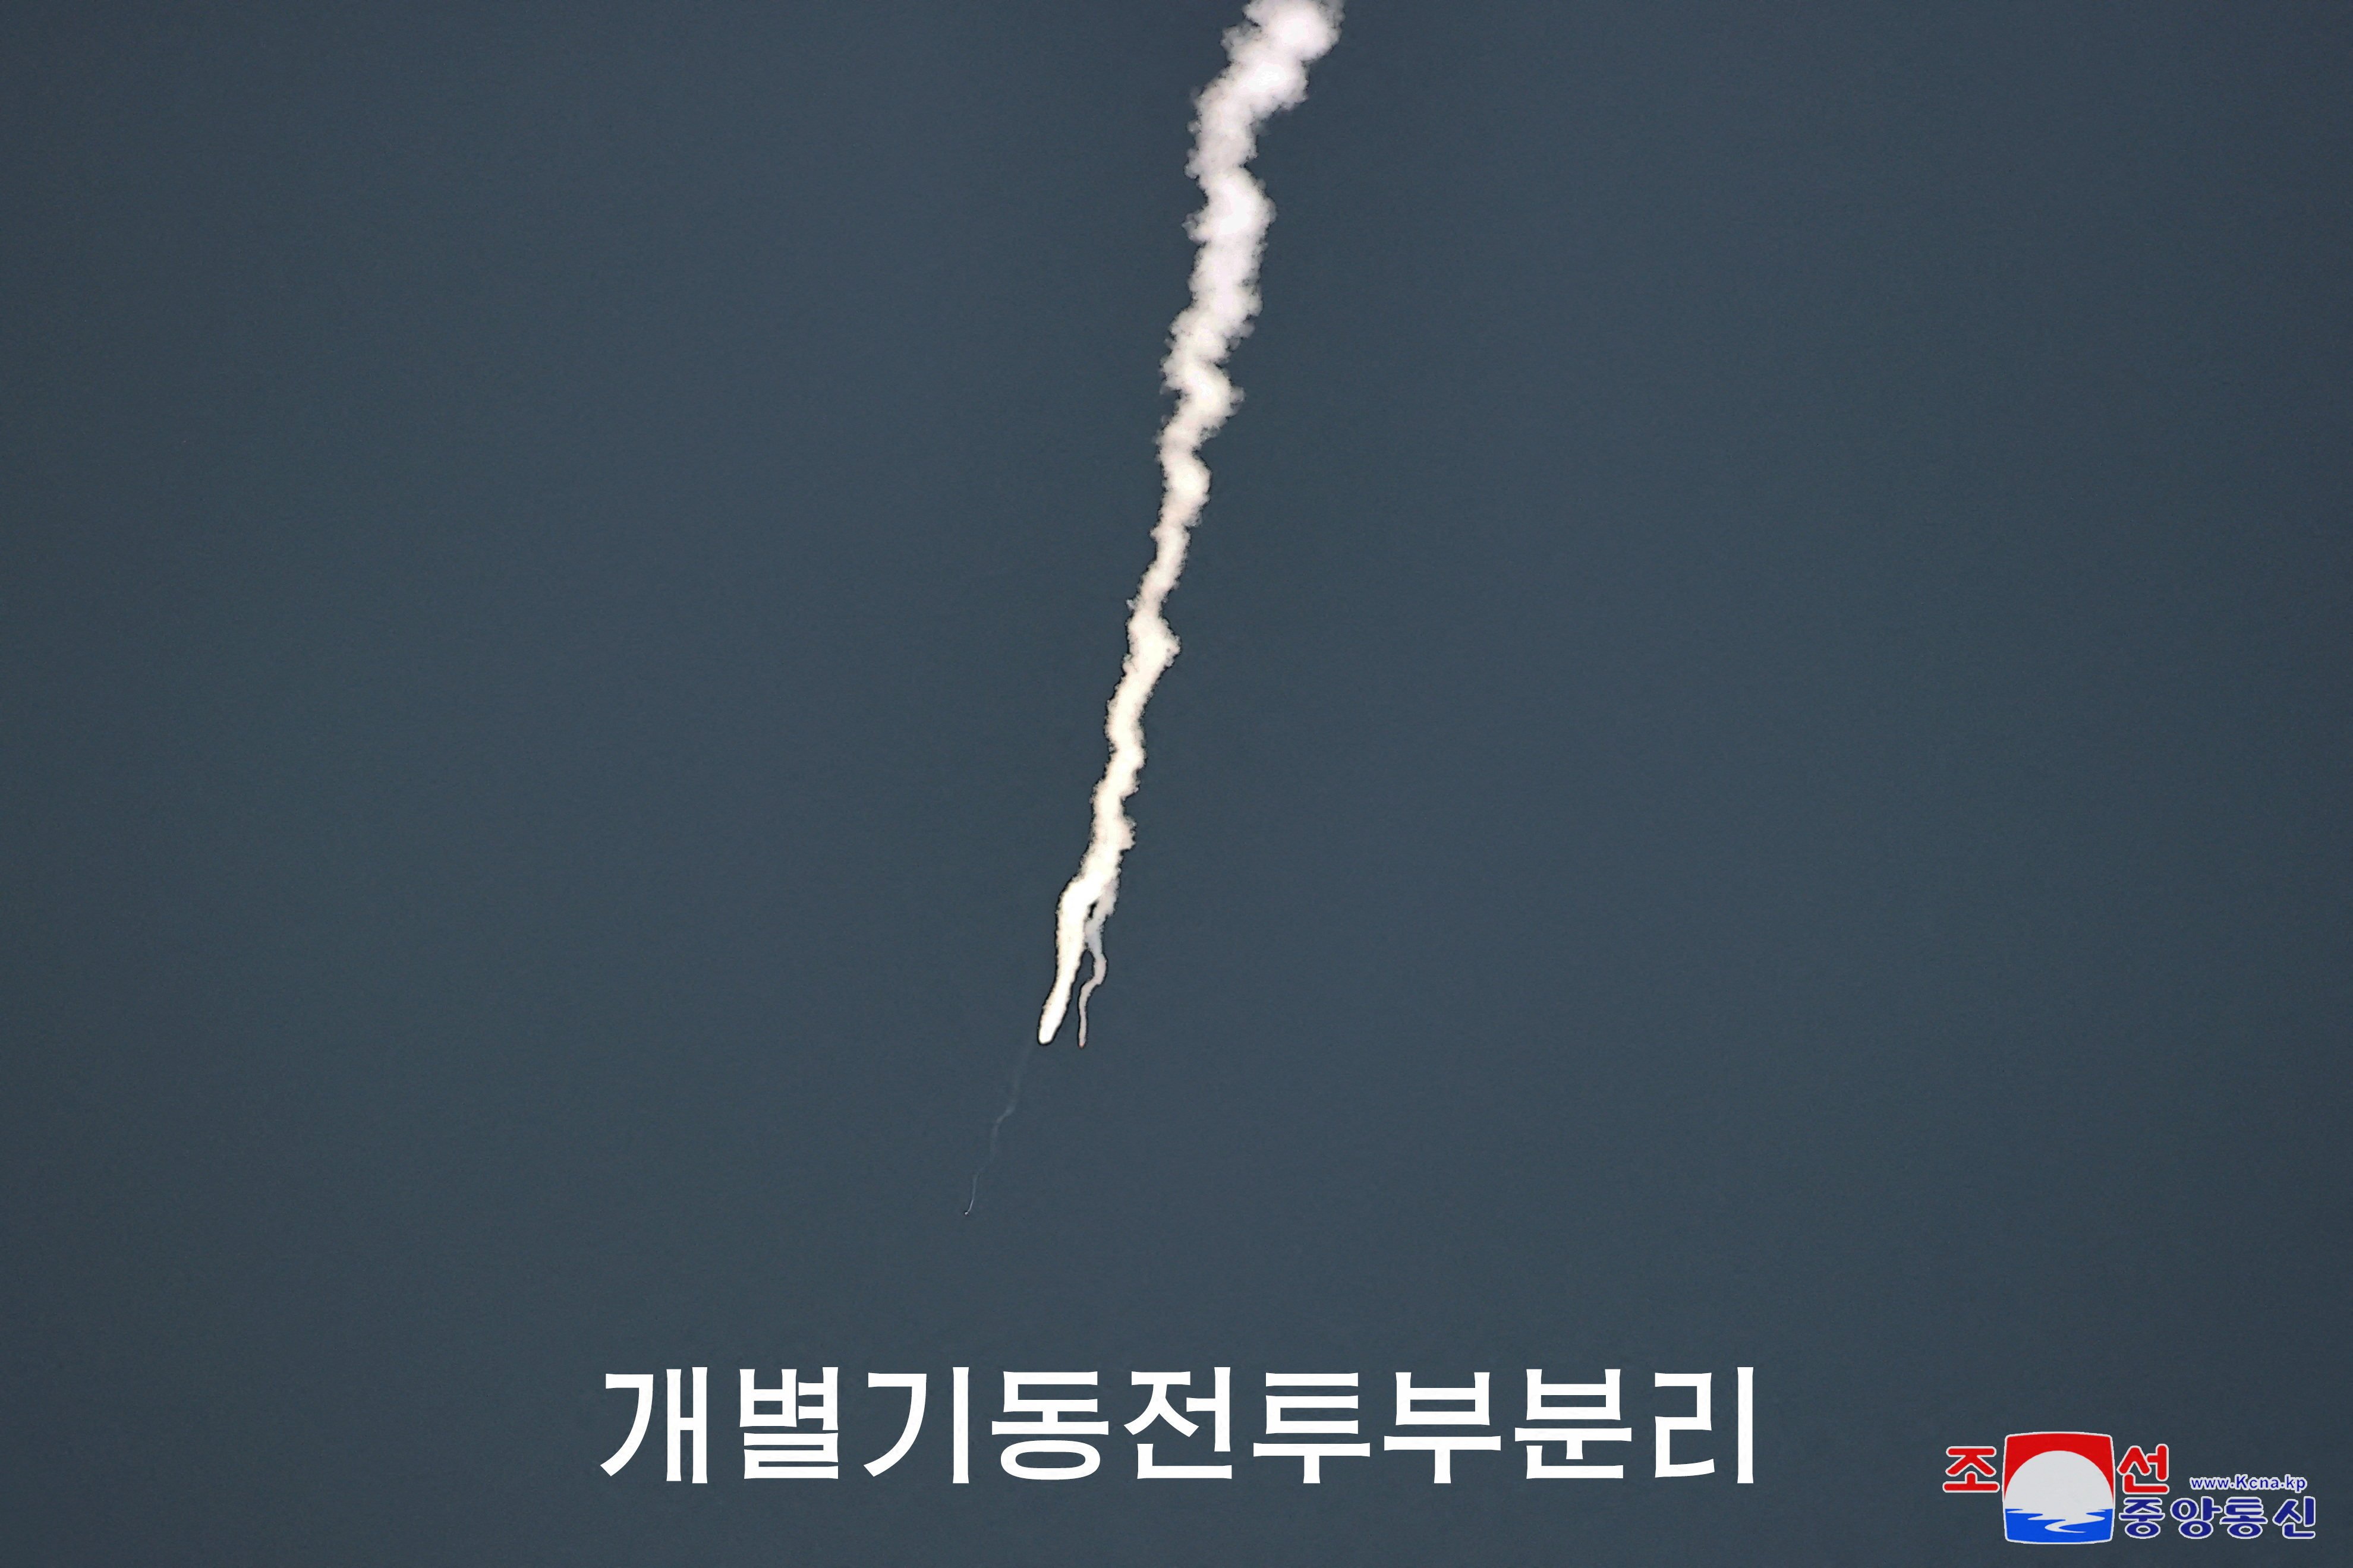 An image released by North Korean state media shows Wednesday’s test of a missile guidance control and combat separation system. Photo: KCNA via Reuters